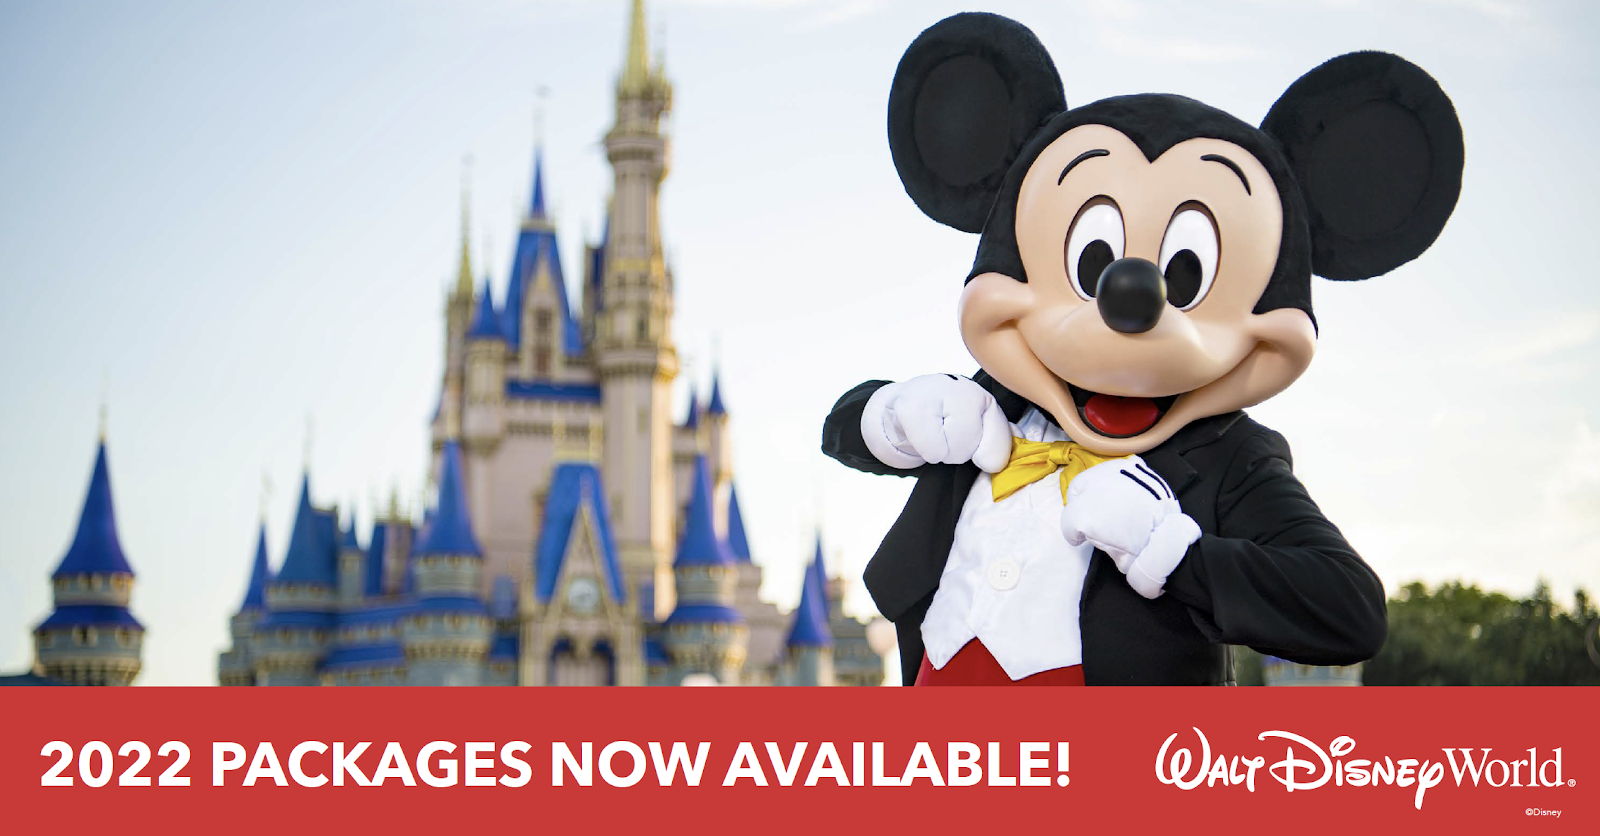 BREAKING NEWS! Early 2022 Walt Disney World Packages Now Available!